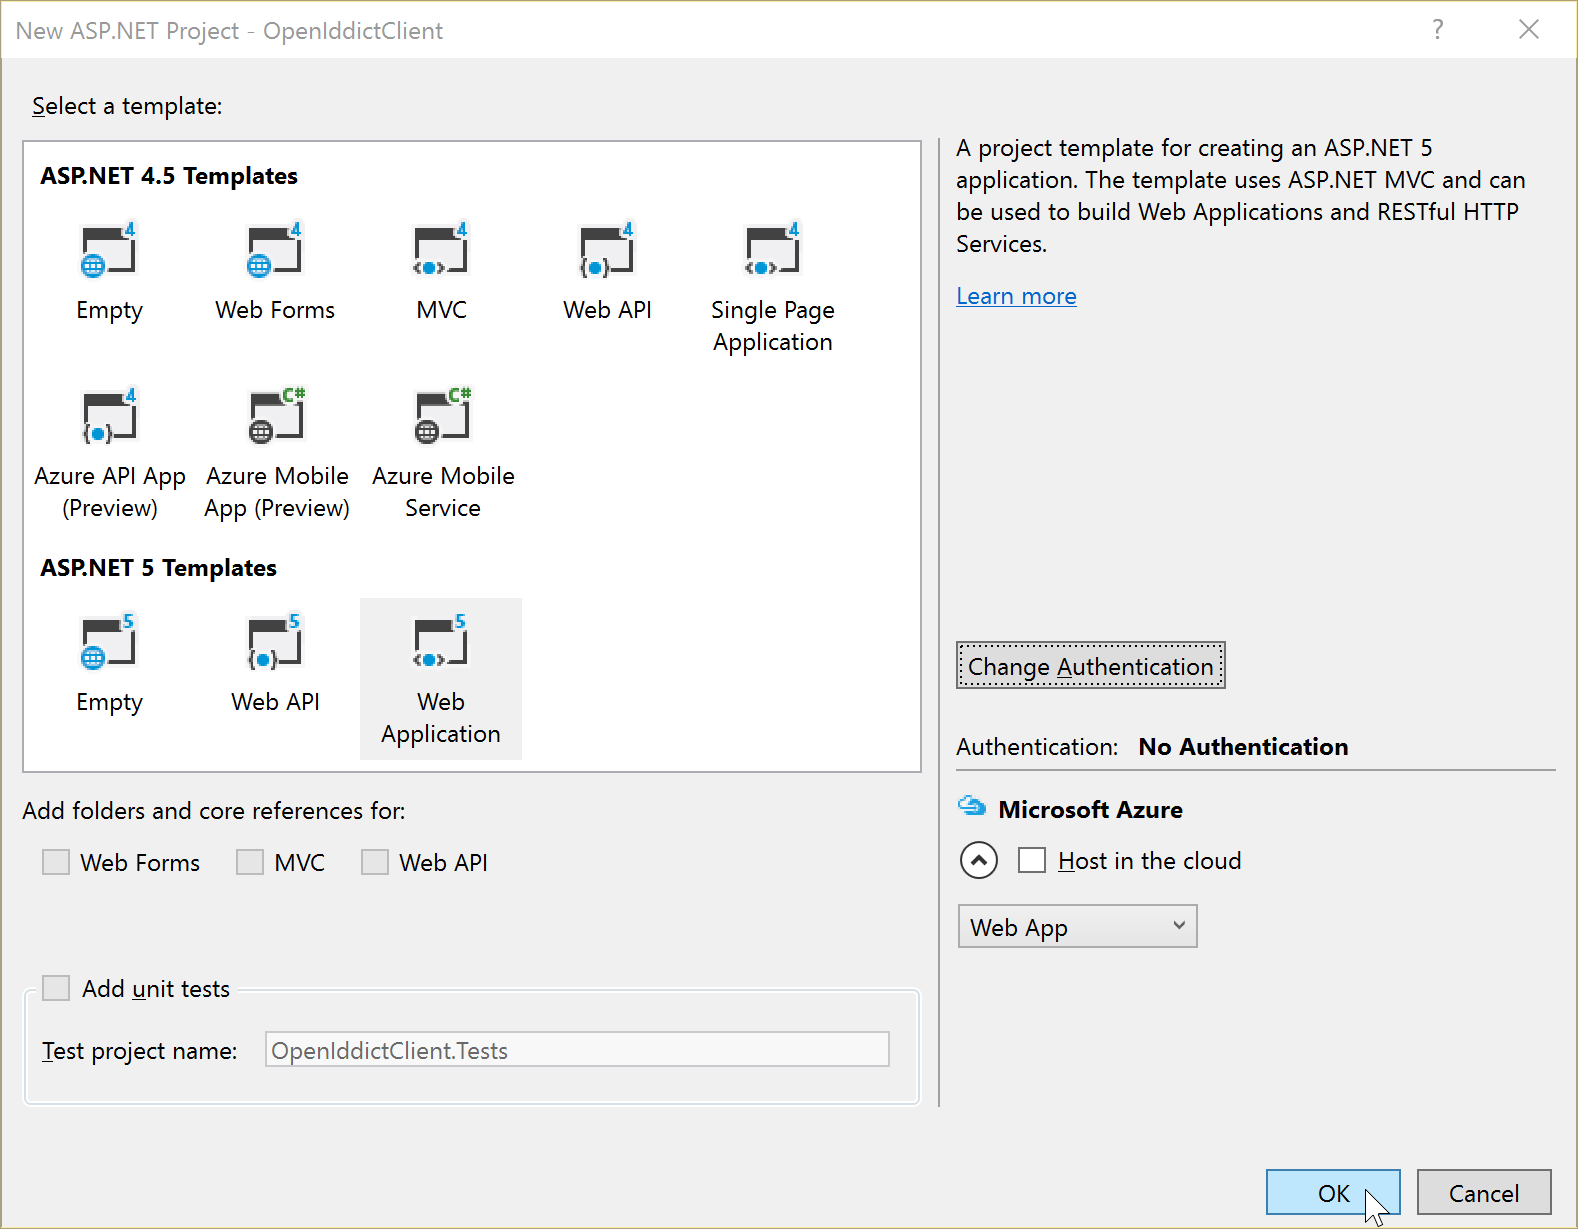 2015-12-20 13_41_32-New ASP.NET Project - OpenIddictClient.png